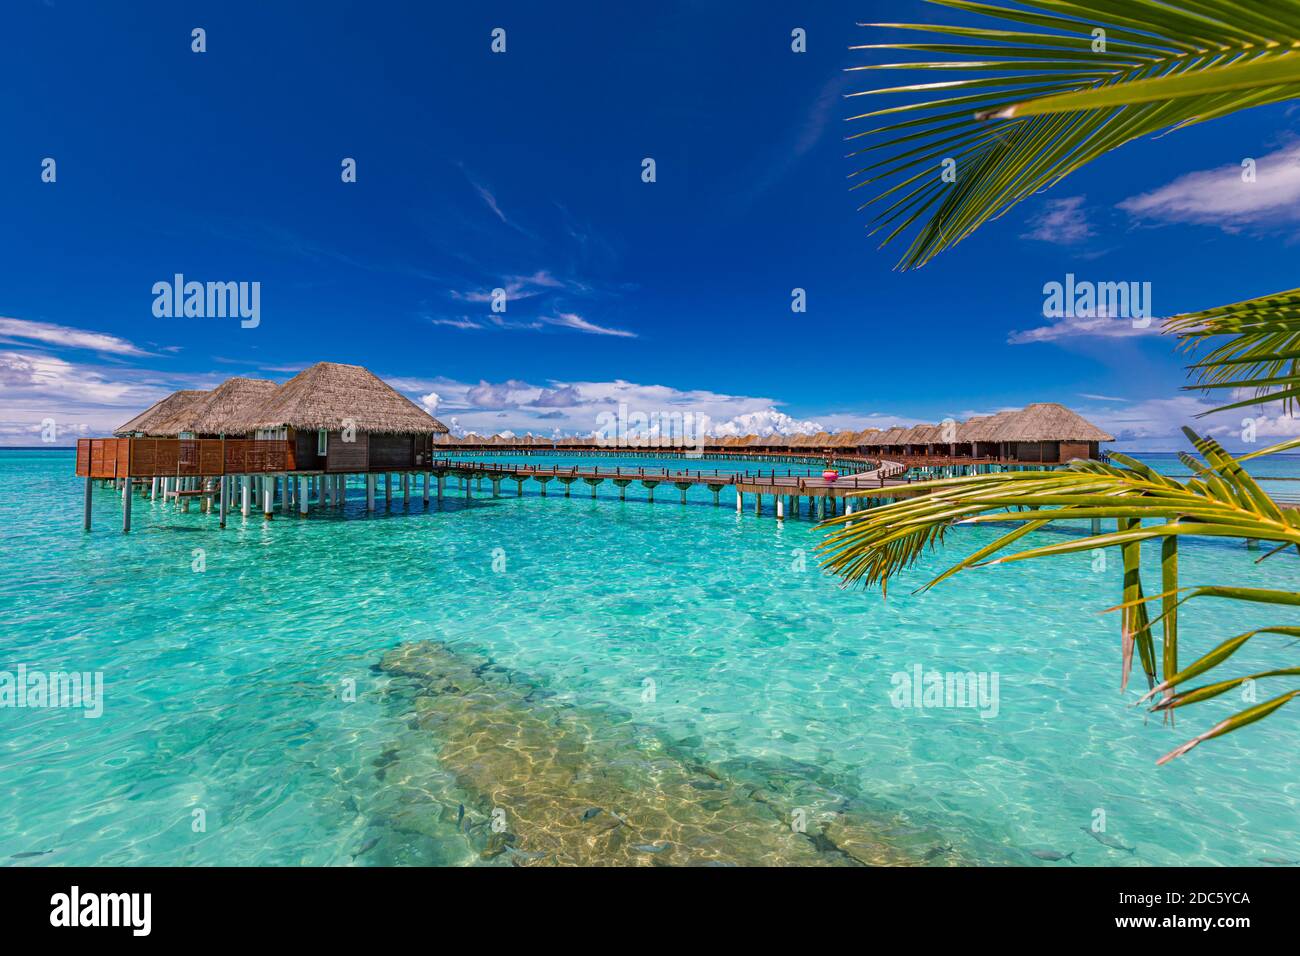 Stunning tourism landscape. Luxurious beach resort, palm trees over calm sea water, beach villas and blue sky. Romantic destination, vacation, holiday Stock Photo